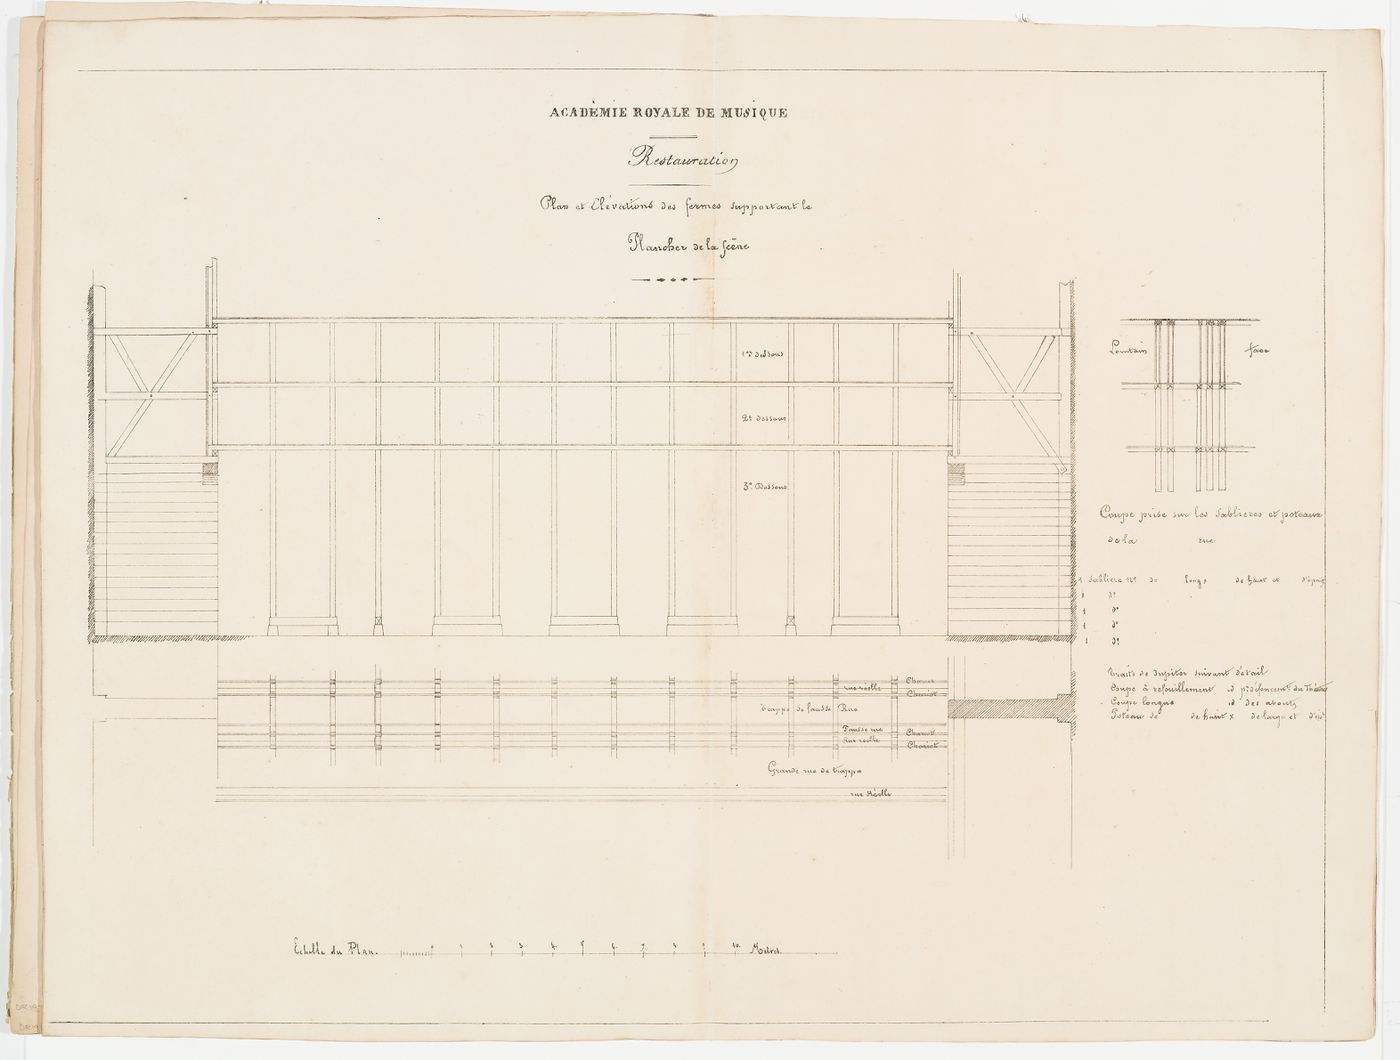 Plans, elevations, and section with additions for restorations to the stage floor joists, Salle Le Peletier